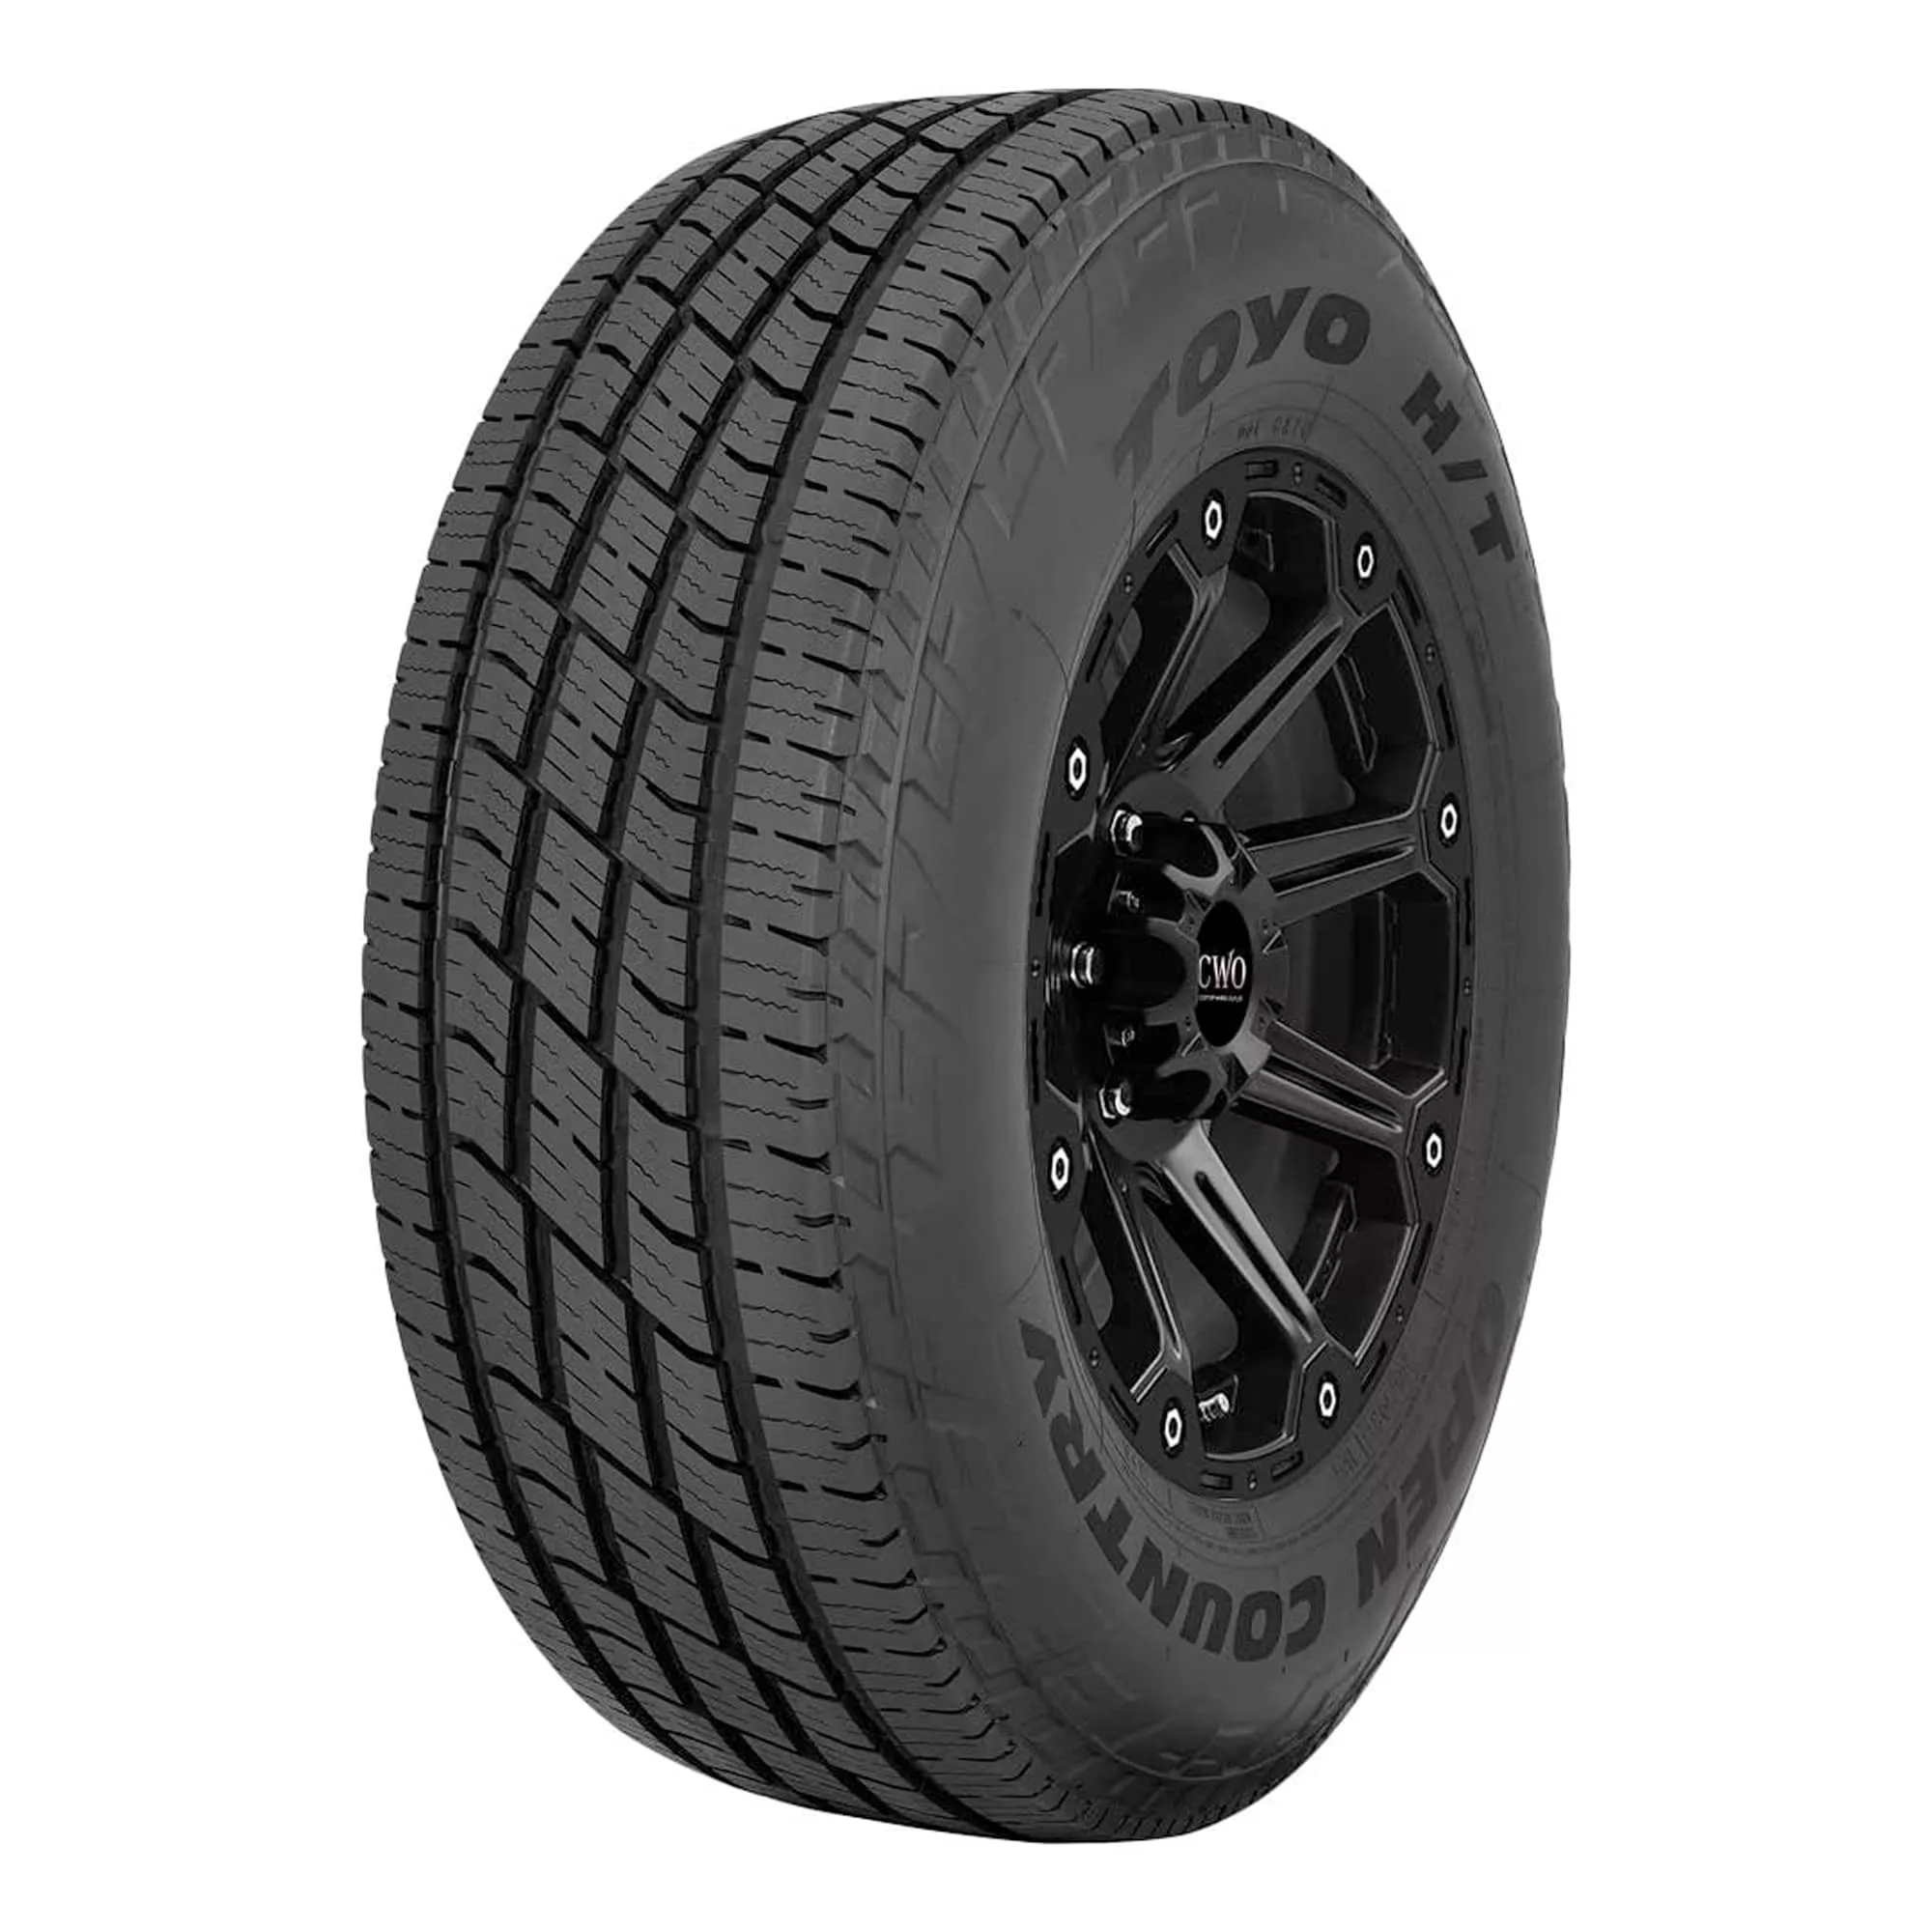 Шина 235/65R18 106H OPEN COUNTRY H/T